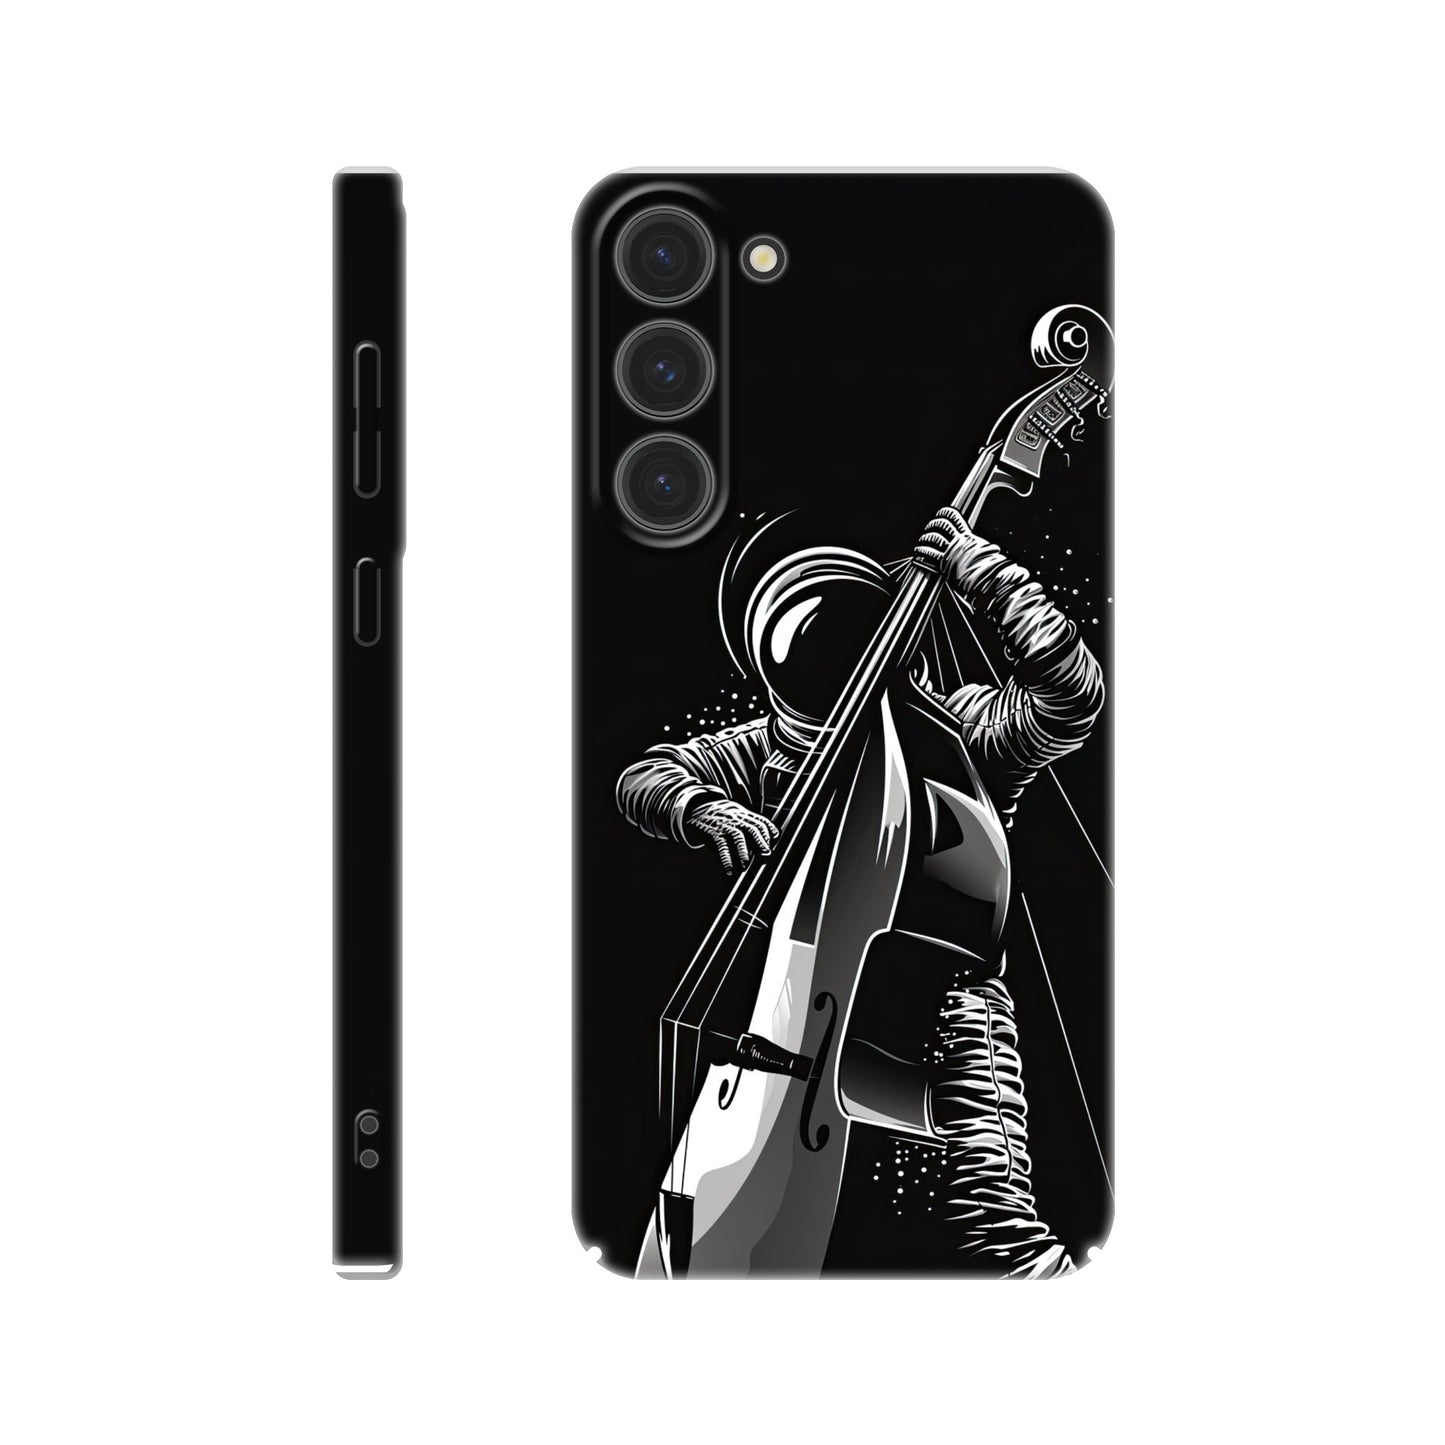 slim phone case with a double bass playing spaceman design